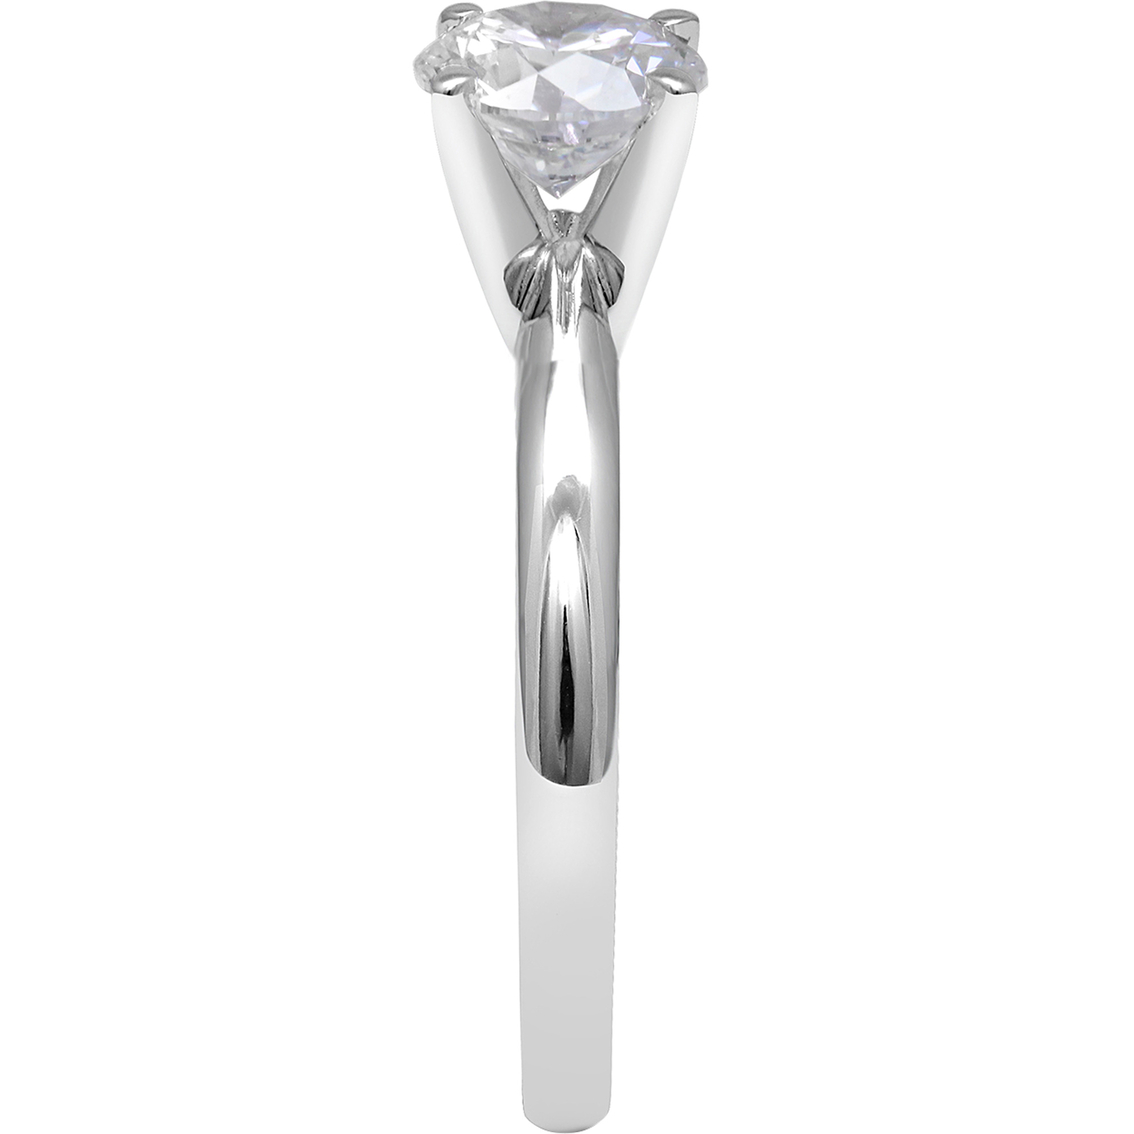 Ray of Brilliance 14K White Gold 1 1/2 ct. Lab Grown Diamond Solitaire Ring - Image 3 of 4